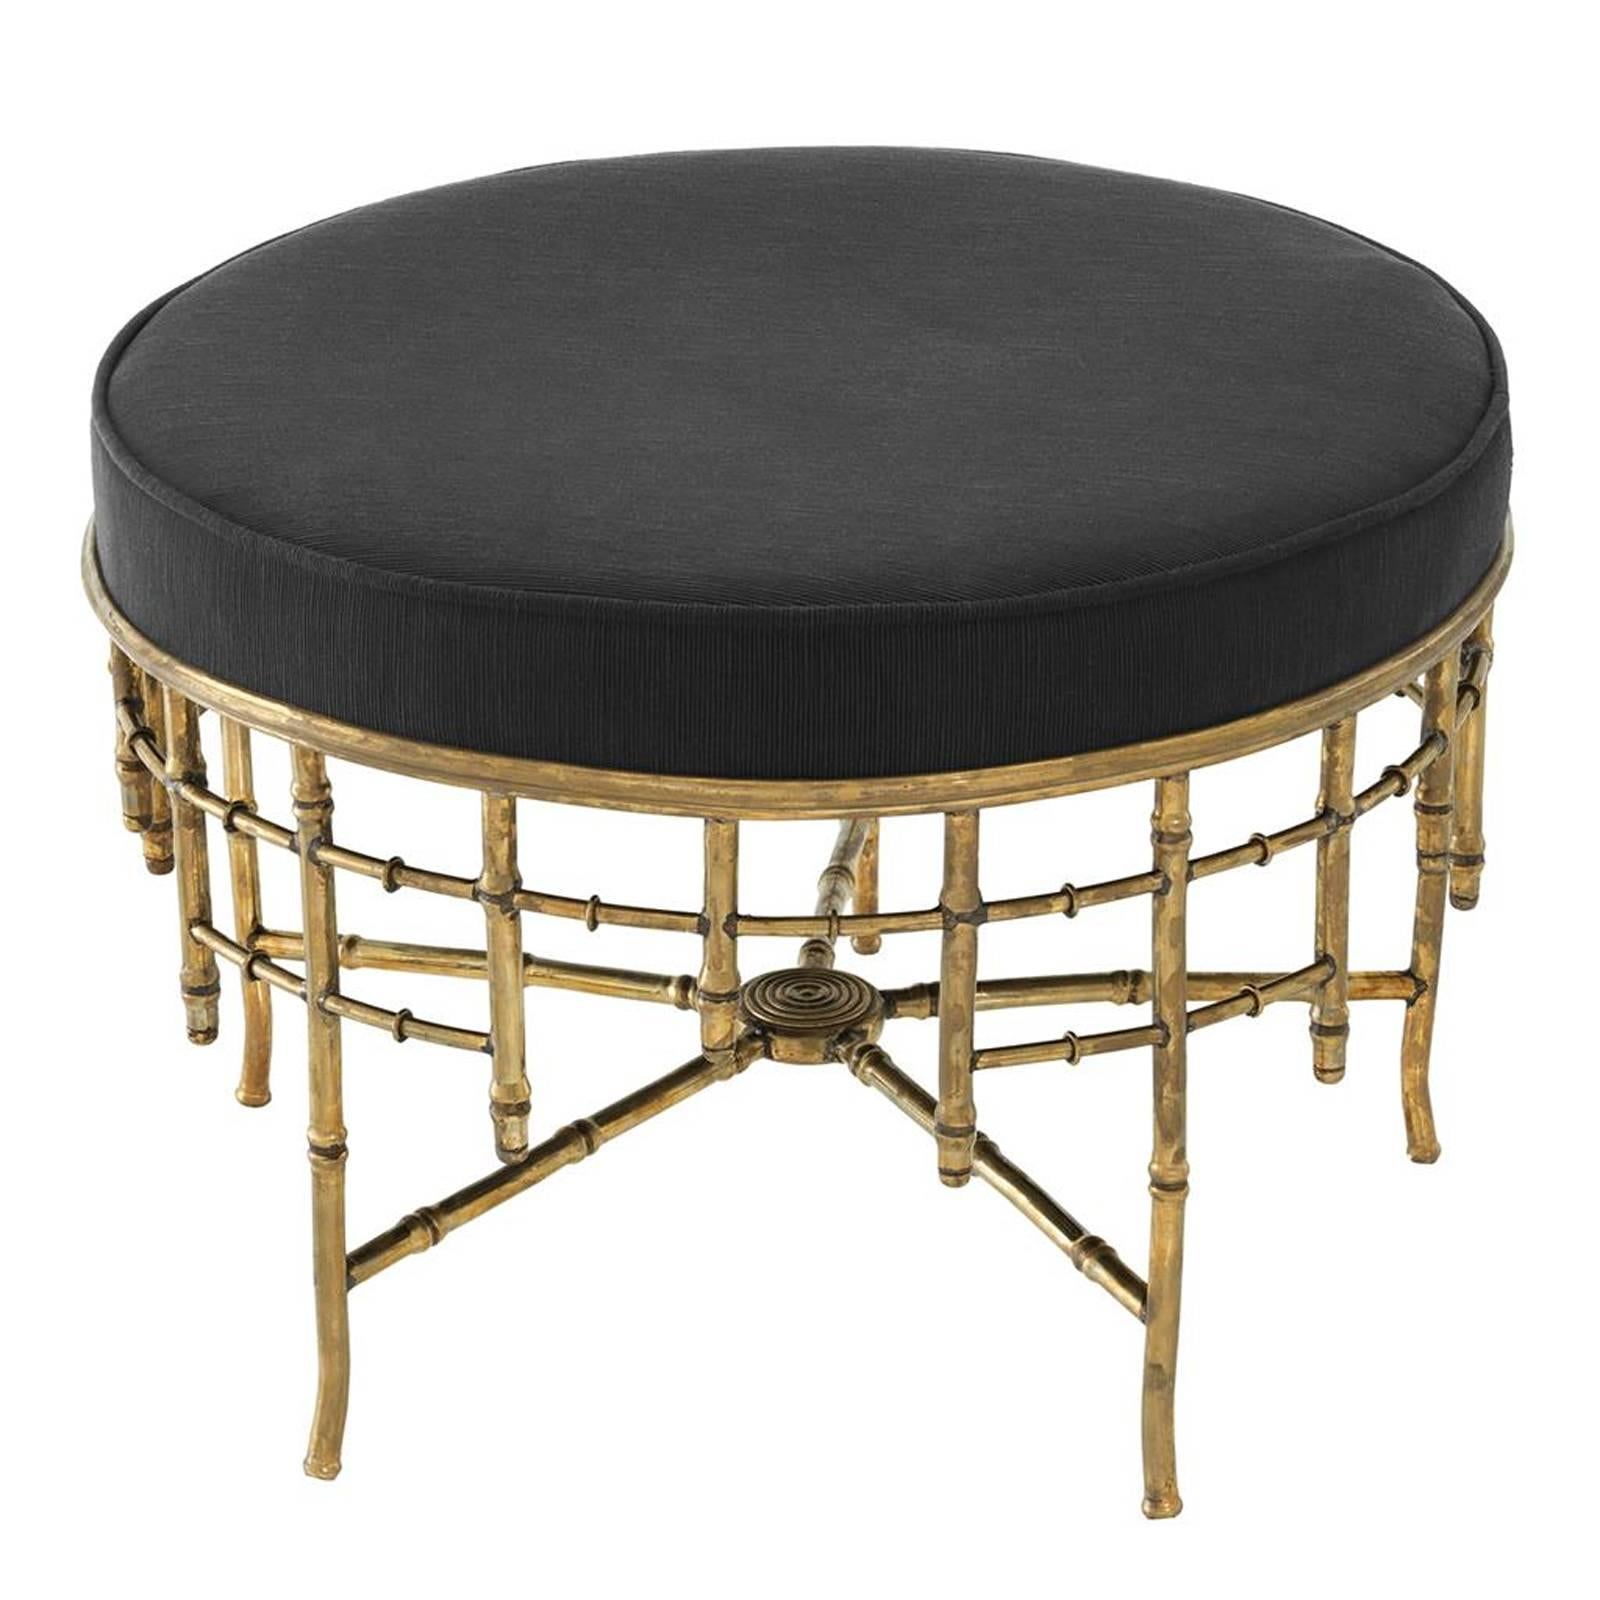 Stool reed large with structure in vintage brass 
finish. Seat upholstered with black albin velvet.
Also available in stool reed medium or square.
